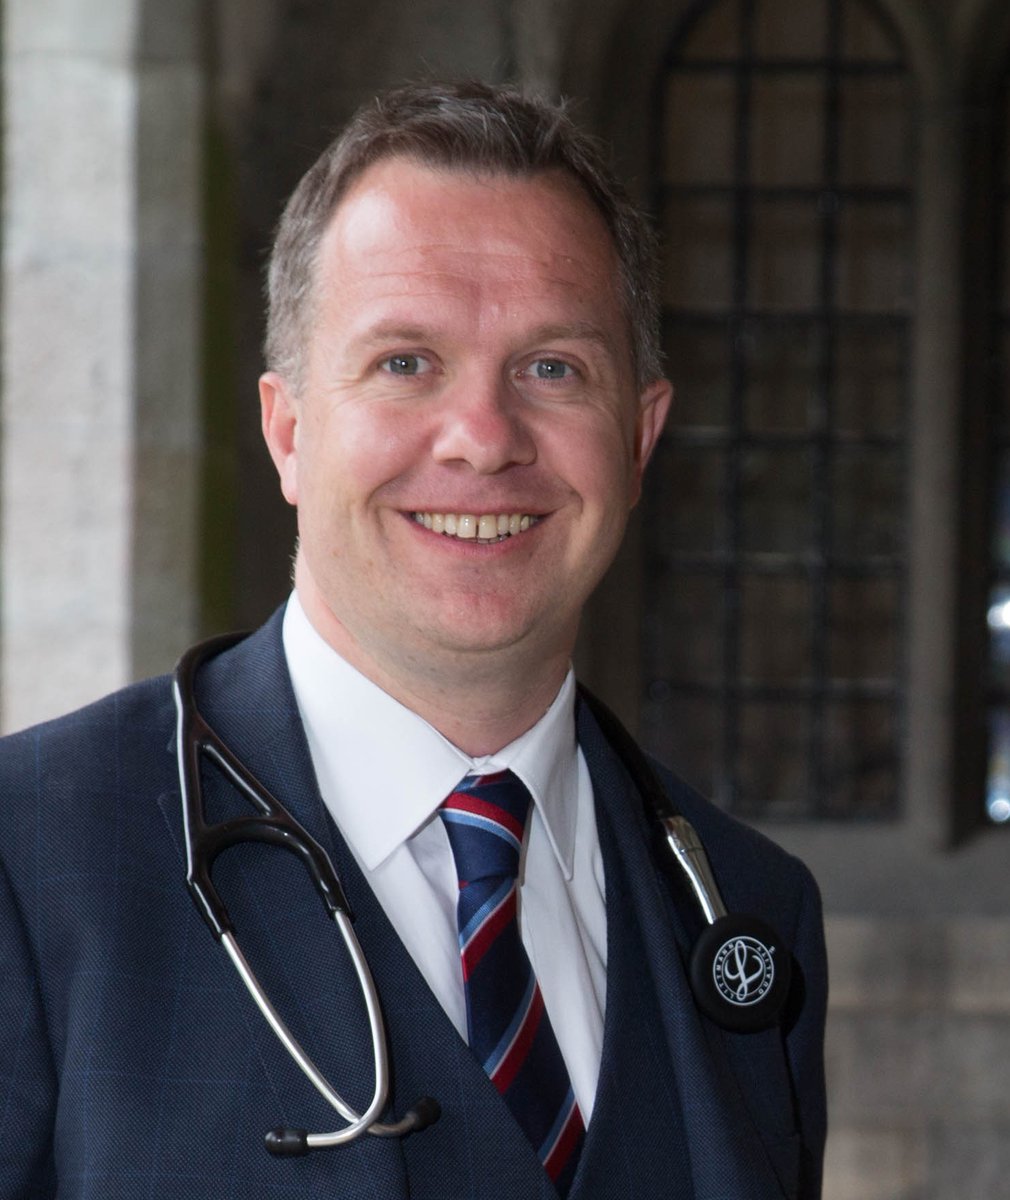 'Working at a University Hospital is a fantastic environment to learn new things.' Prof Derek O’Keeffe is Consultant Endocrinologist at University Hospital Galway, and National Clinical Lead for Diabetes. #PeopleOfHSE